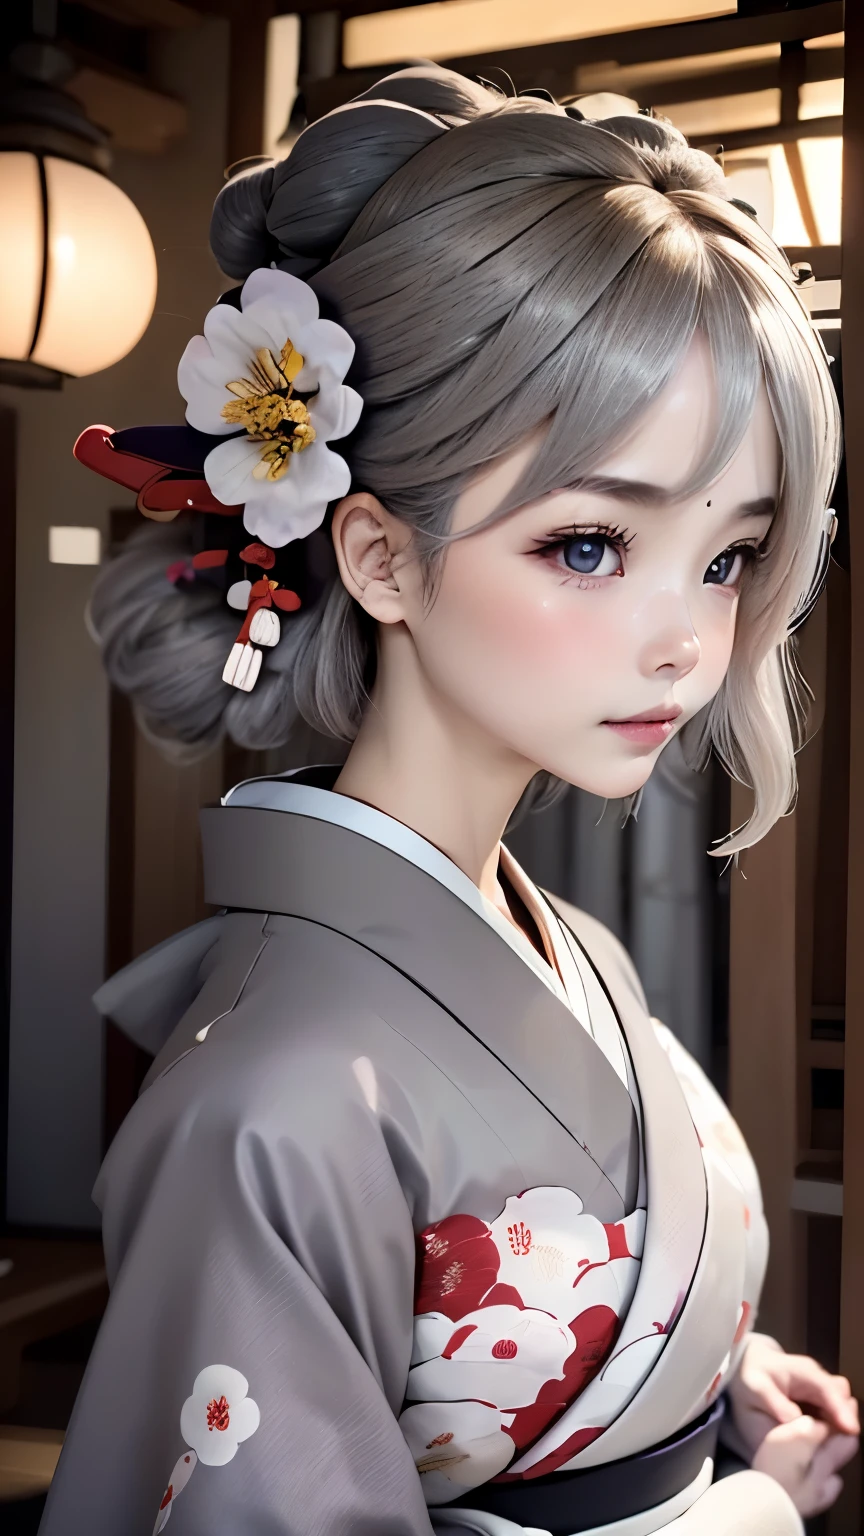 A world of silence、anatomy、one girl、very cute face、Perfect good looks、(Ash gray hair:1.5)、flower hair ornament、plump lips、charming eyes、((Beautiful Nishijin-ori kimono、light purple kimono:1.3、Kimono with very delicate pattern))、Beautiful upper body angle、elegant pose、Farcas on the face、blurred background、Beautiful Japan garden、RAW photo、highest quality、Super high quality、master piece:1.3、cinematic lighting、professional photographer、50ｍｍlens、